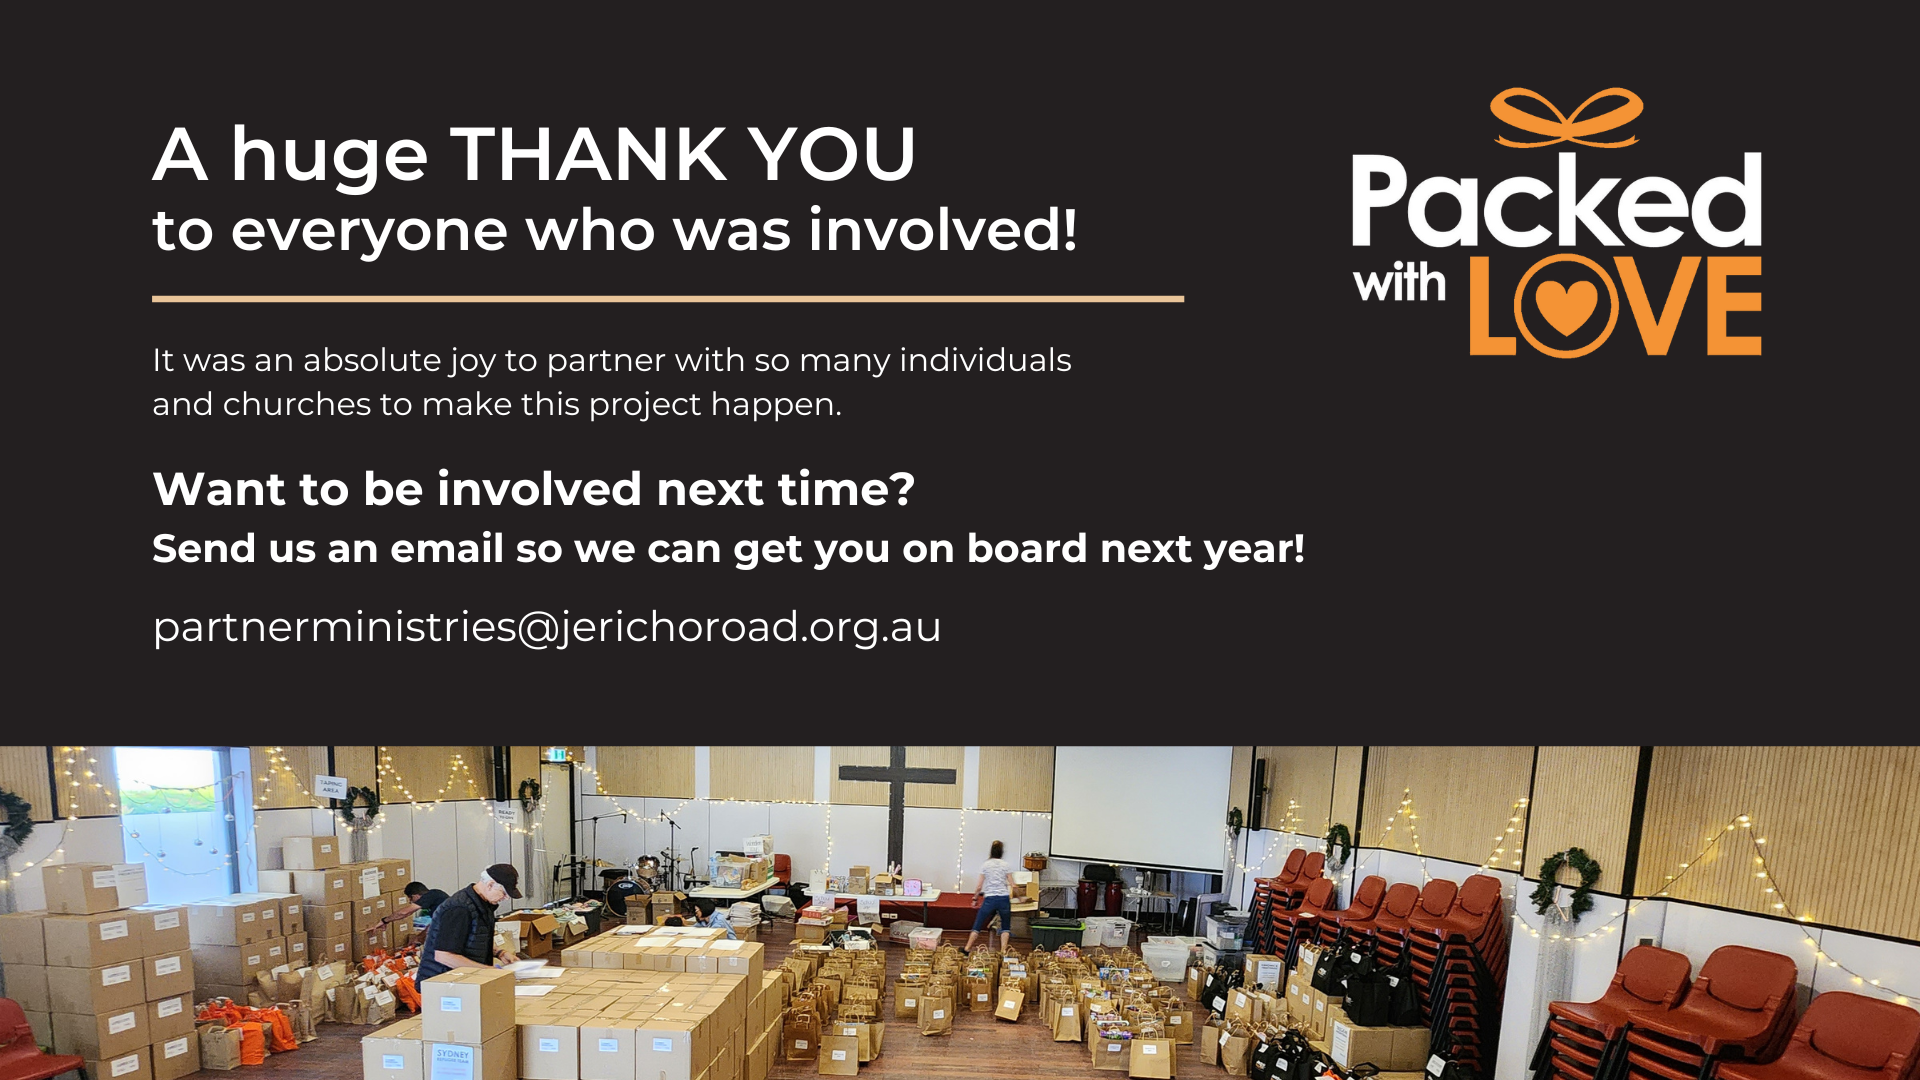 Join us next time - email us at partnerministries@jerichoroad.org.au to let us know that you'd be keen to get involved in Packed with Love in future.